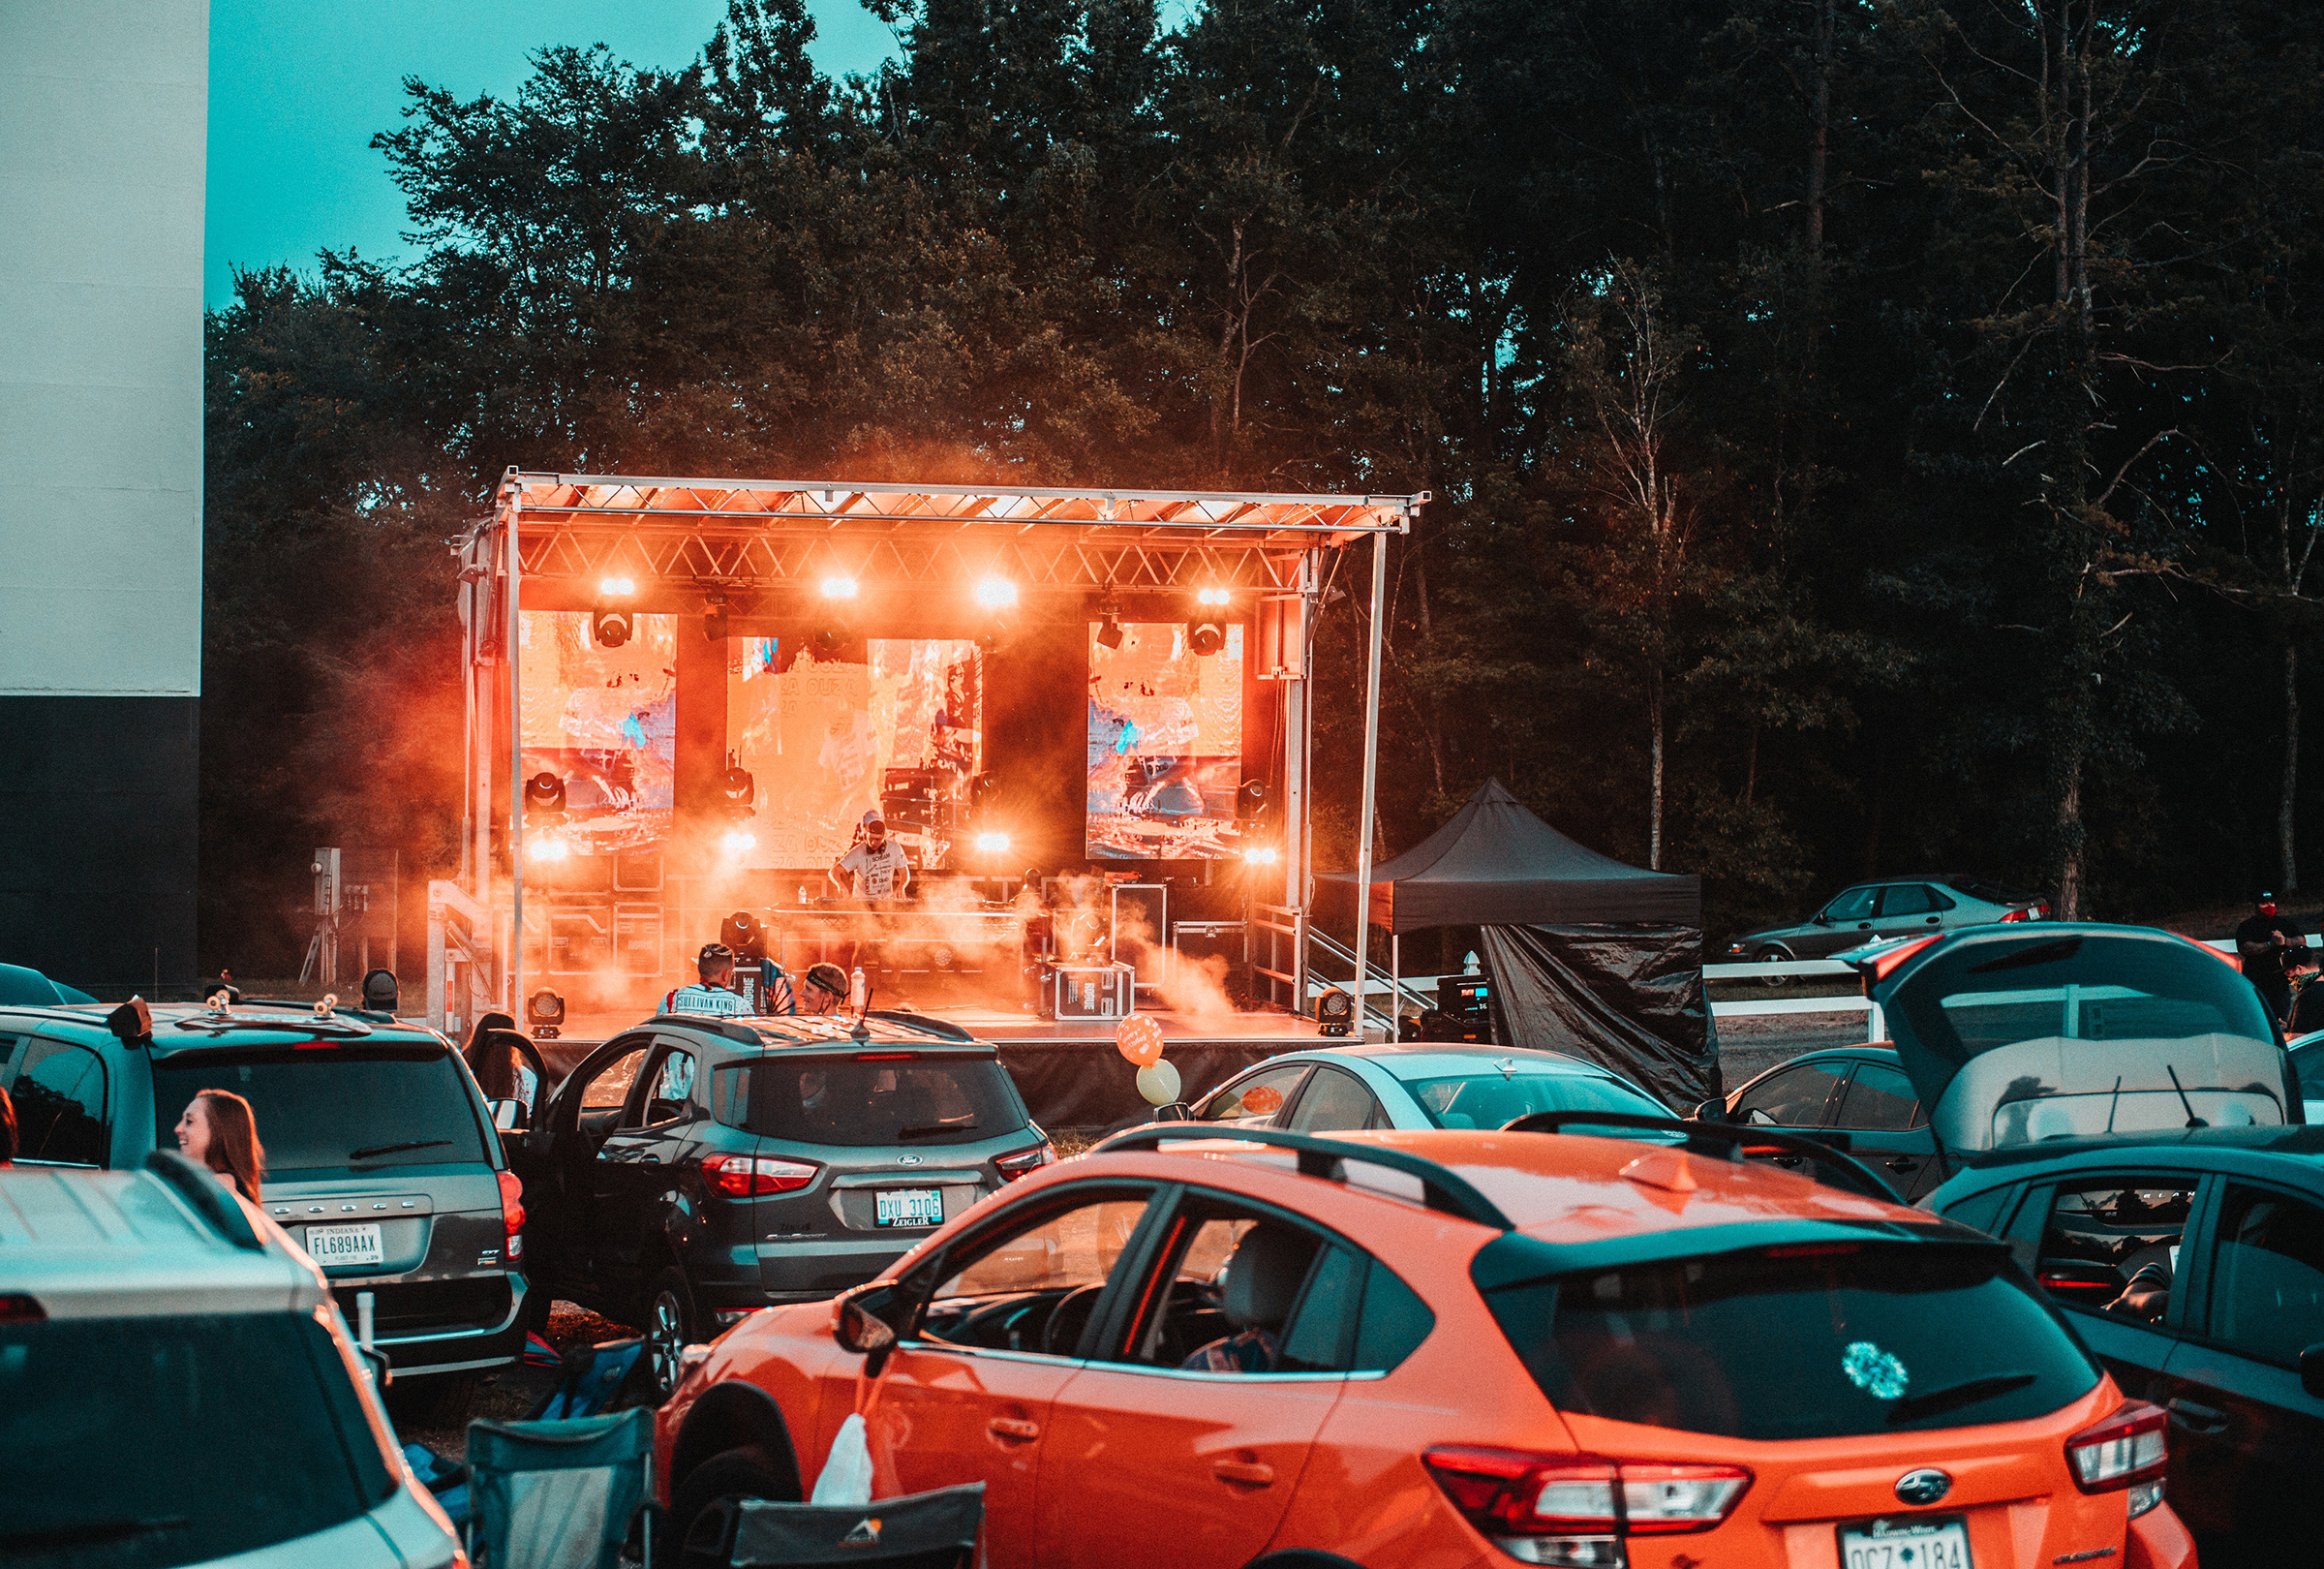 The Hounds Drive-In in Kings Mountain, N.C., has hosted more than 18 concerts, and included bands and DJs (Key Vision Photography)